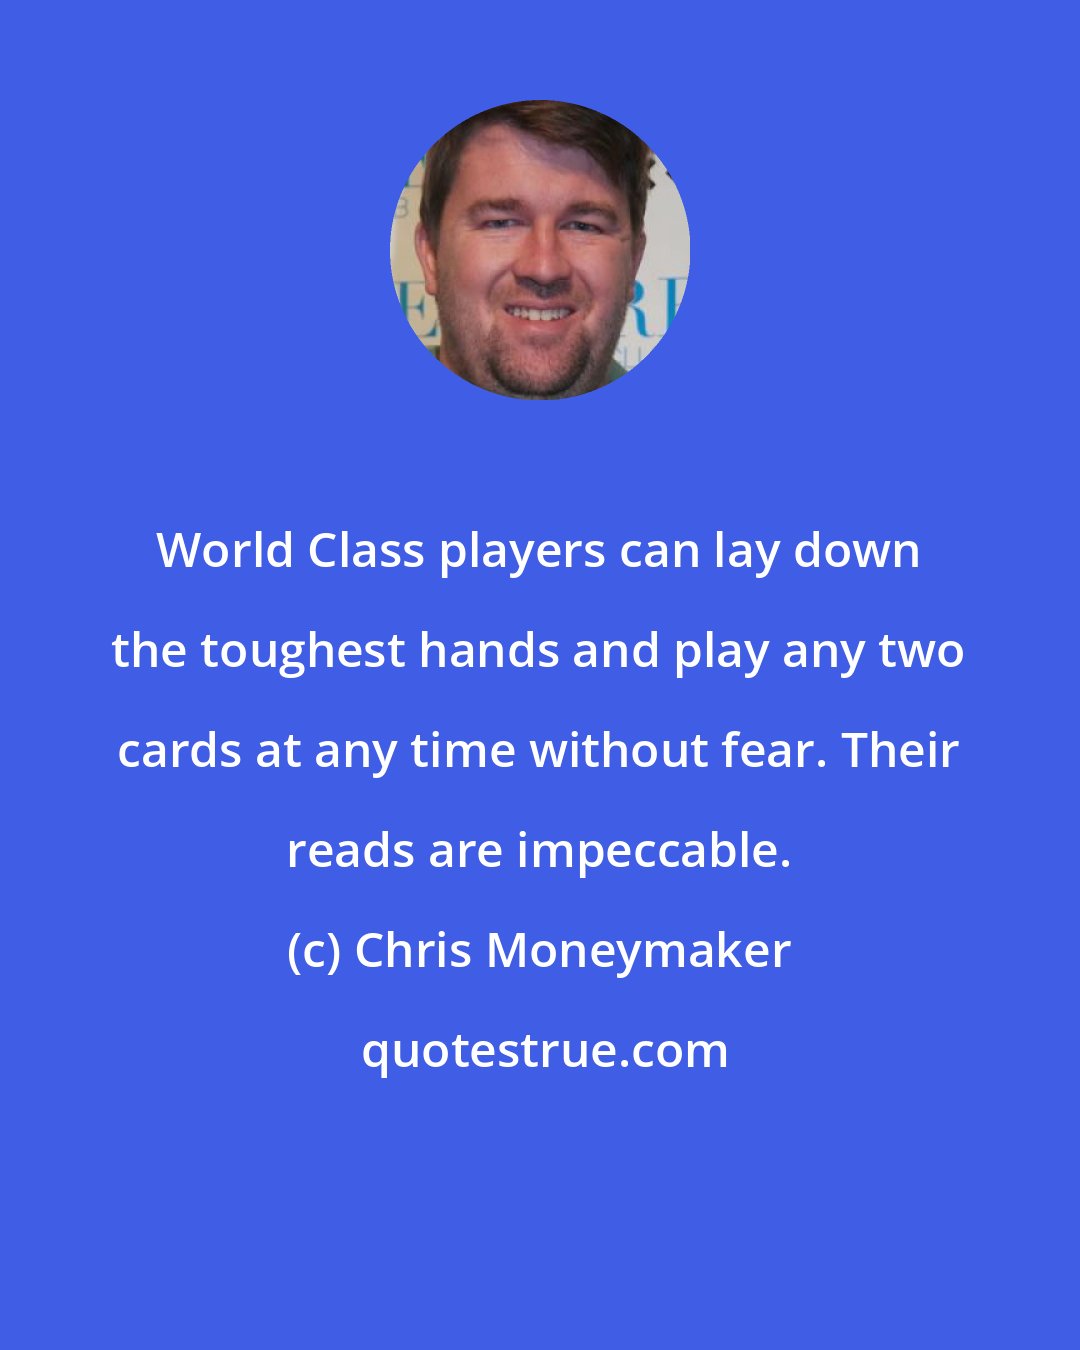 Chris Moneymaker: World Class players can lay down the toughest hands and play any two cards at any time without fear. Their reads are impeccable.